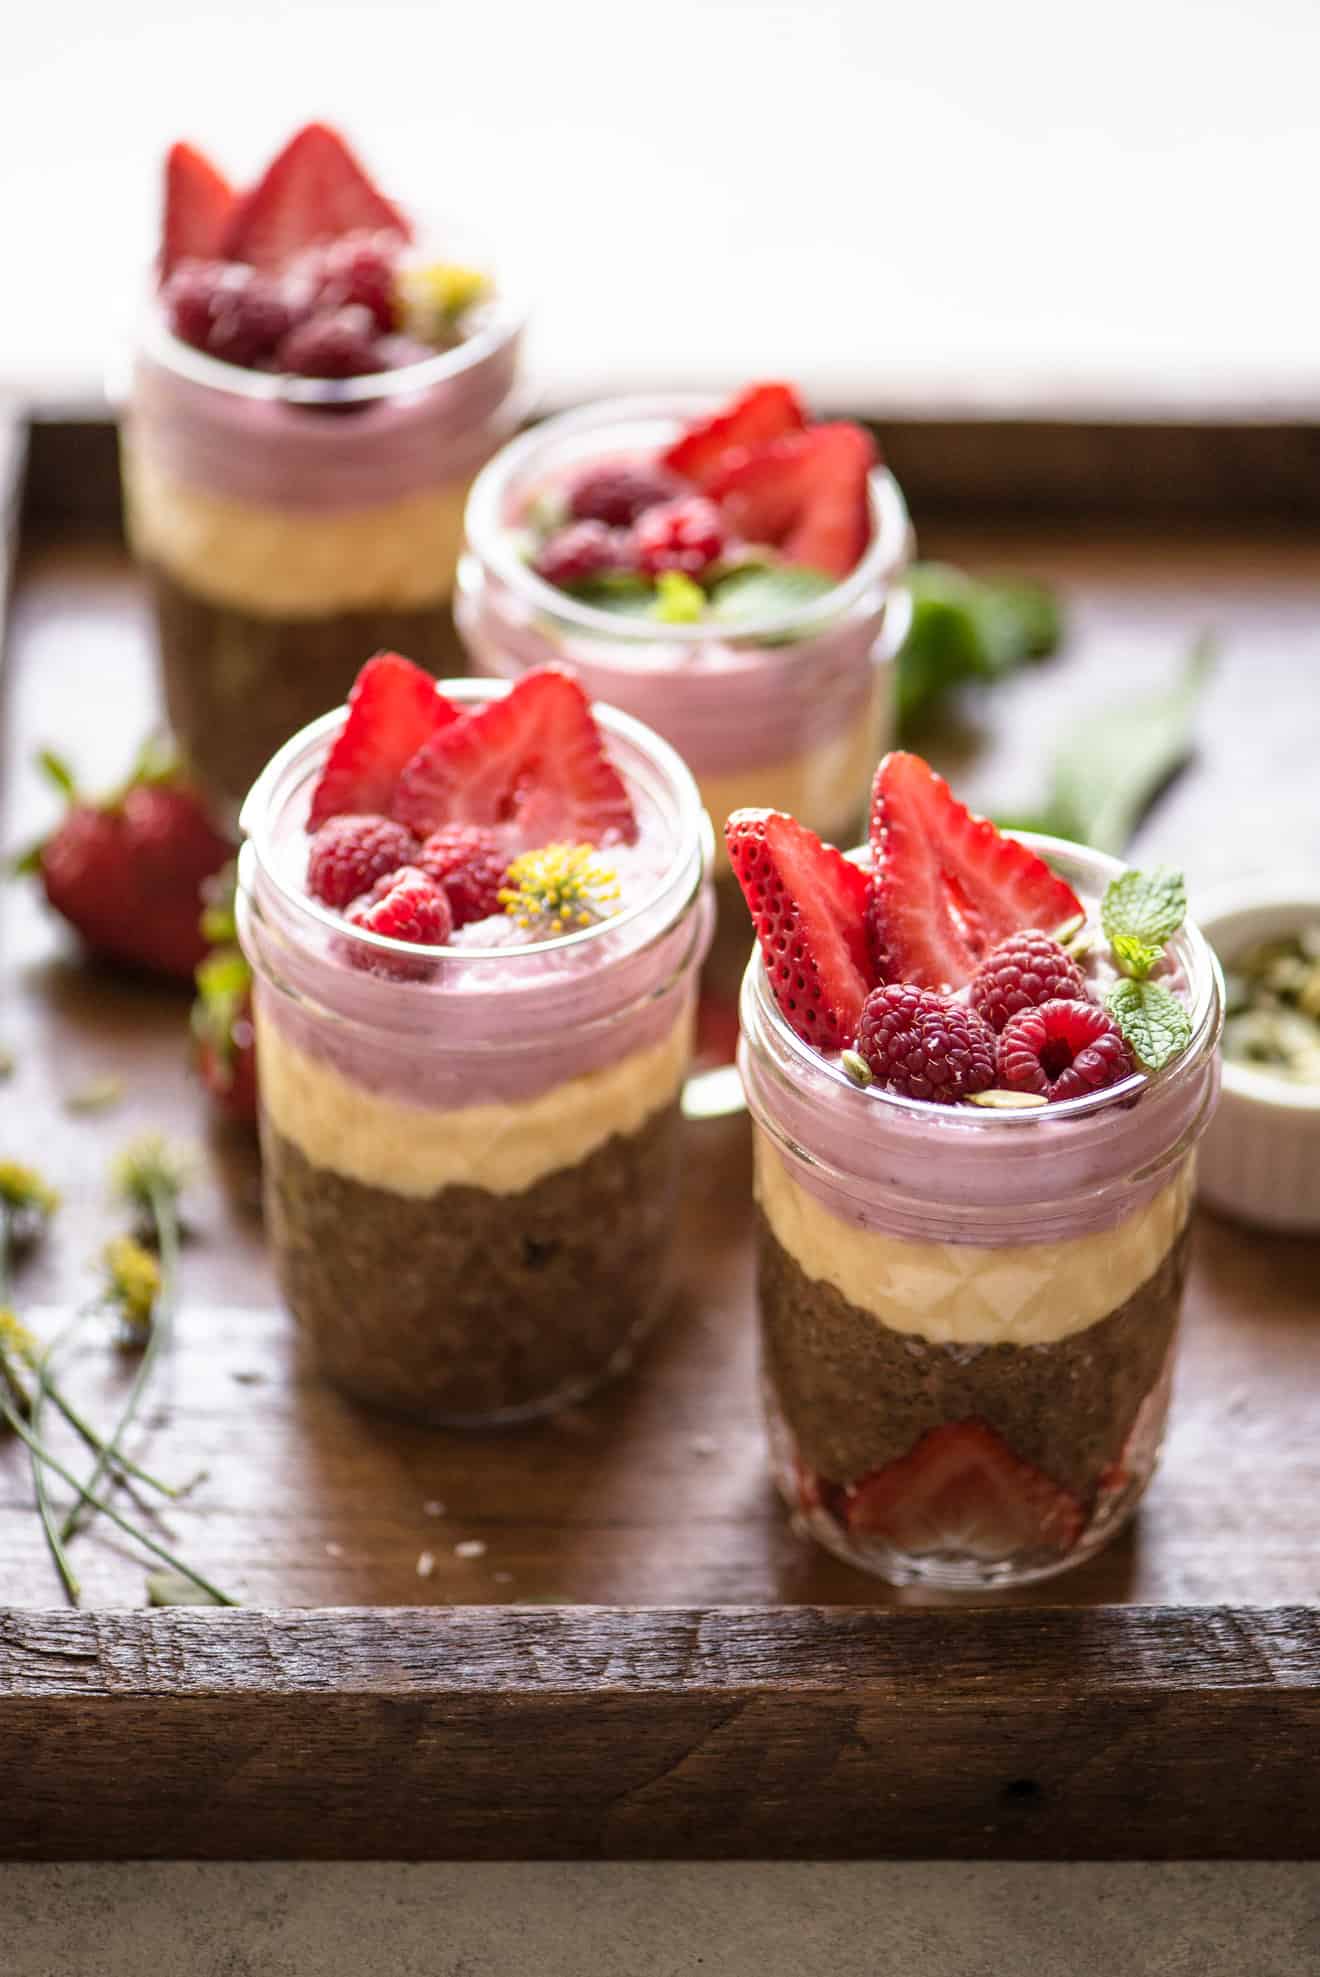 VEGAN Chocolate Chia Pudding Parfaits with Mango & Mixed Berry Mousse - a simple, healthy dessert that is great for summer!